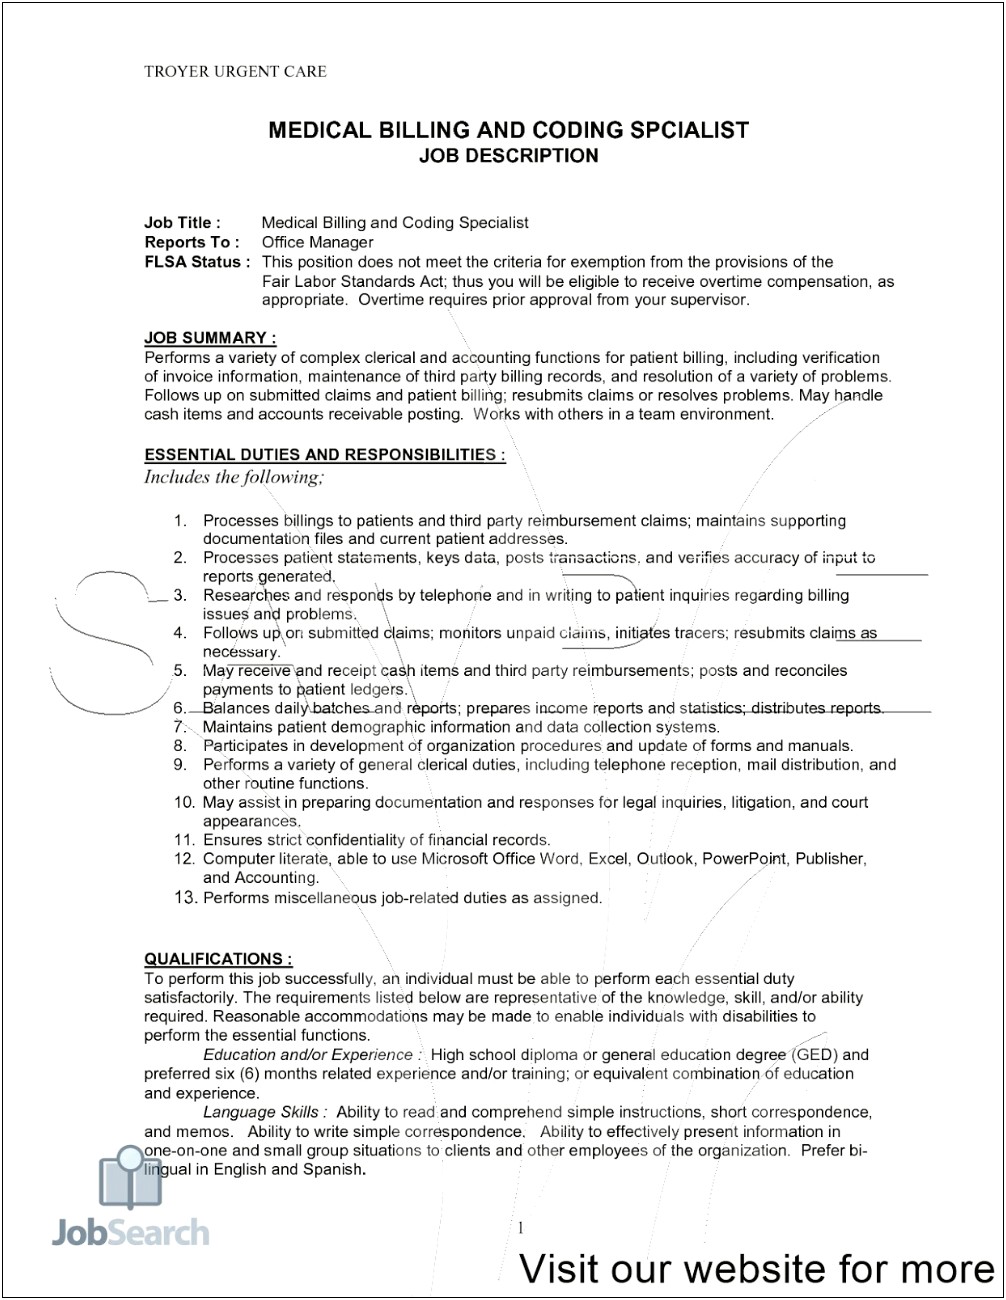 Appliance Service And Parts Manager Resume Examples